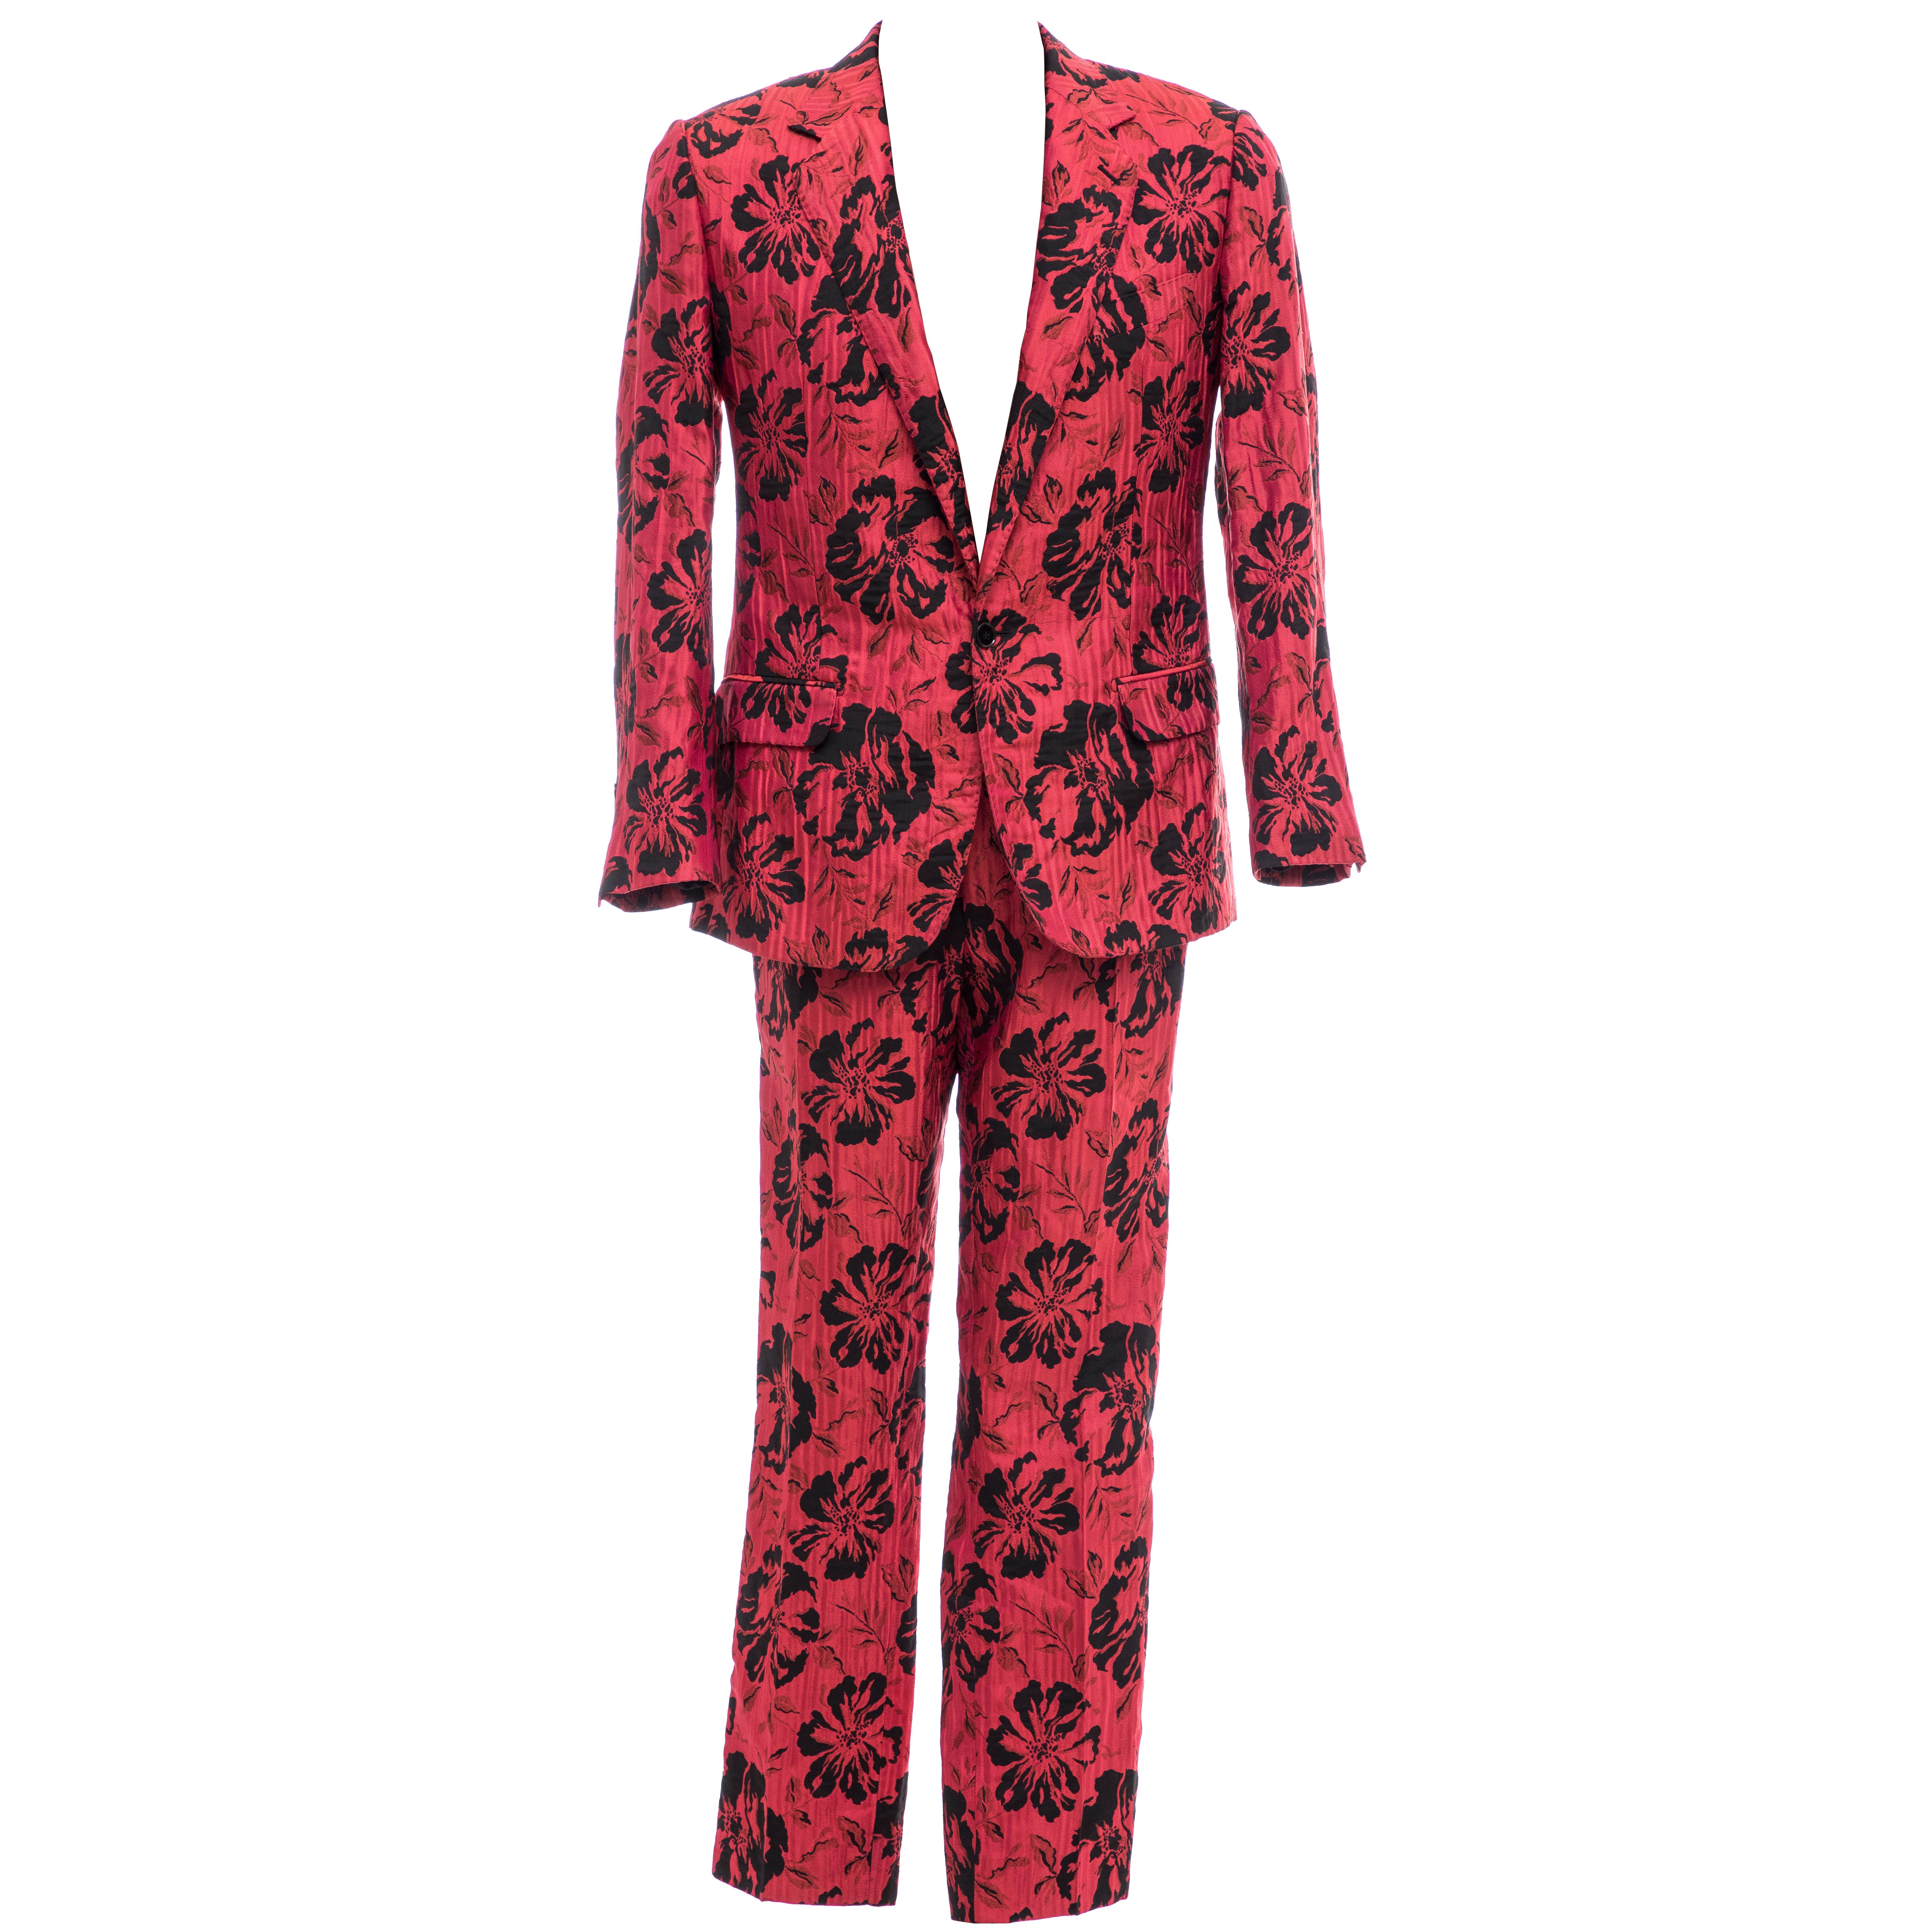 Dolce & Gabbana Men's Runway Red Floral Jacquard Suit, Fall 2011